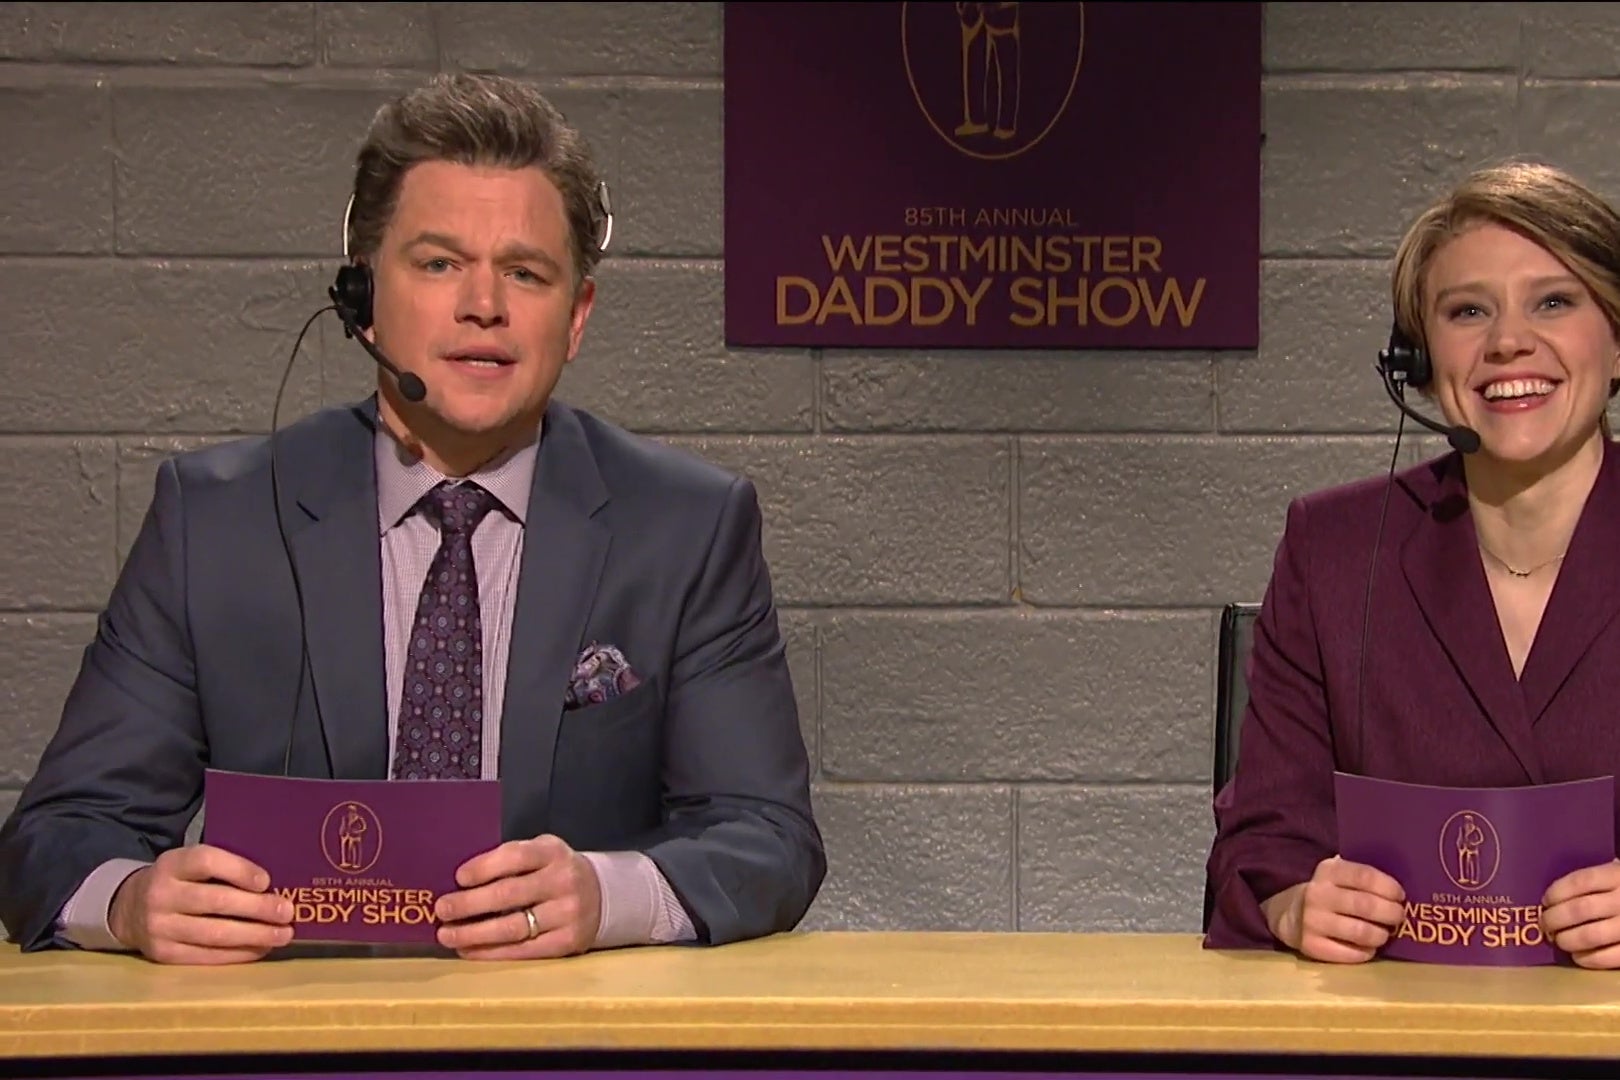 Matt Damon and Kate McKinnon sit at the announcer’s podium for the Westminster Daddy Show.